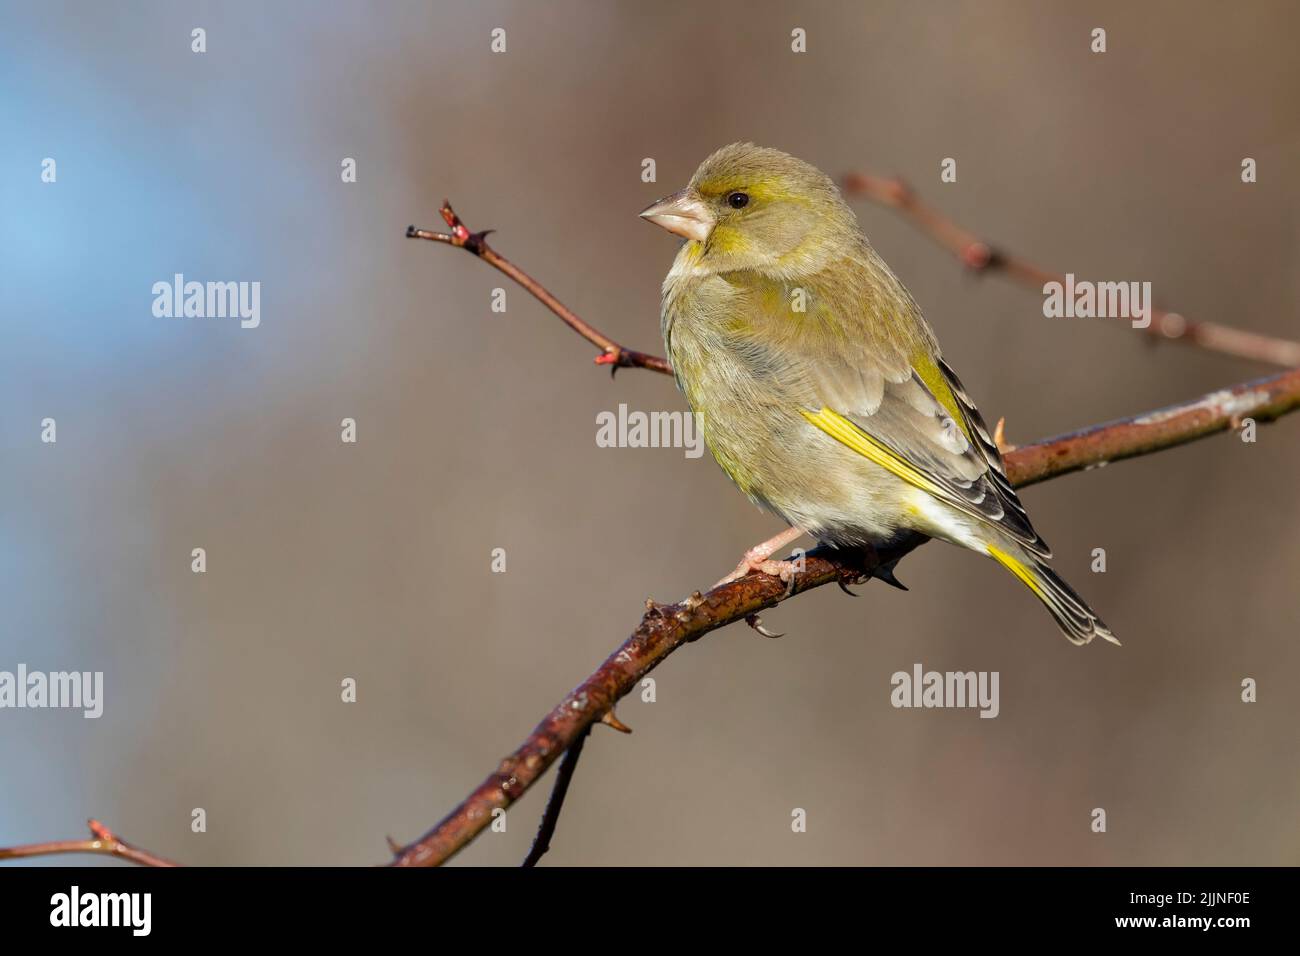 European female goldfinch (chloris chloris), sitting on a branch on a homogeneous blurred background. Stock Photo